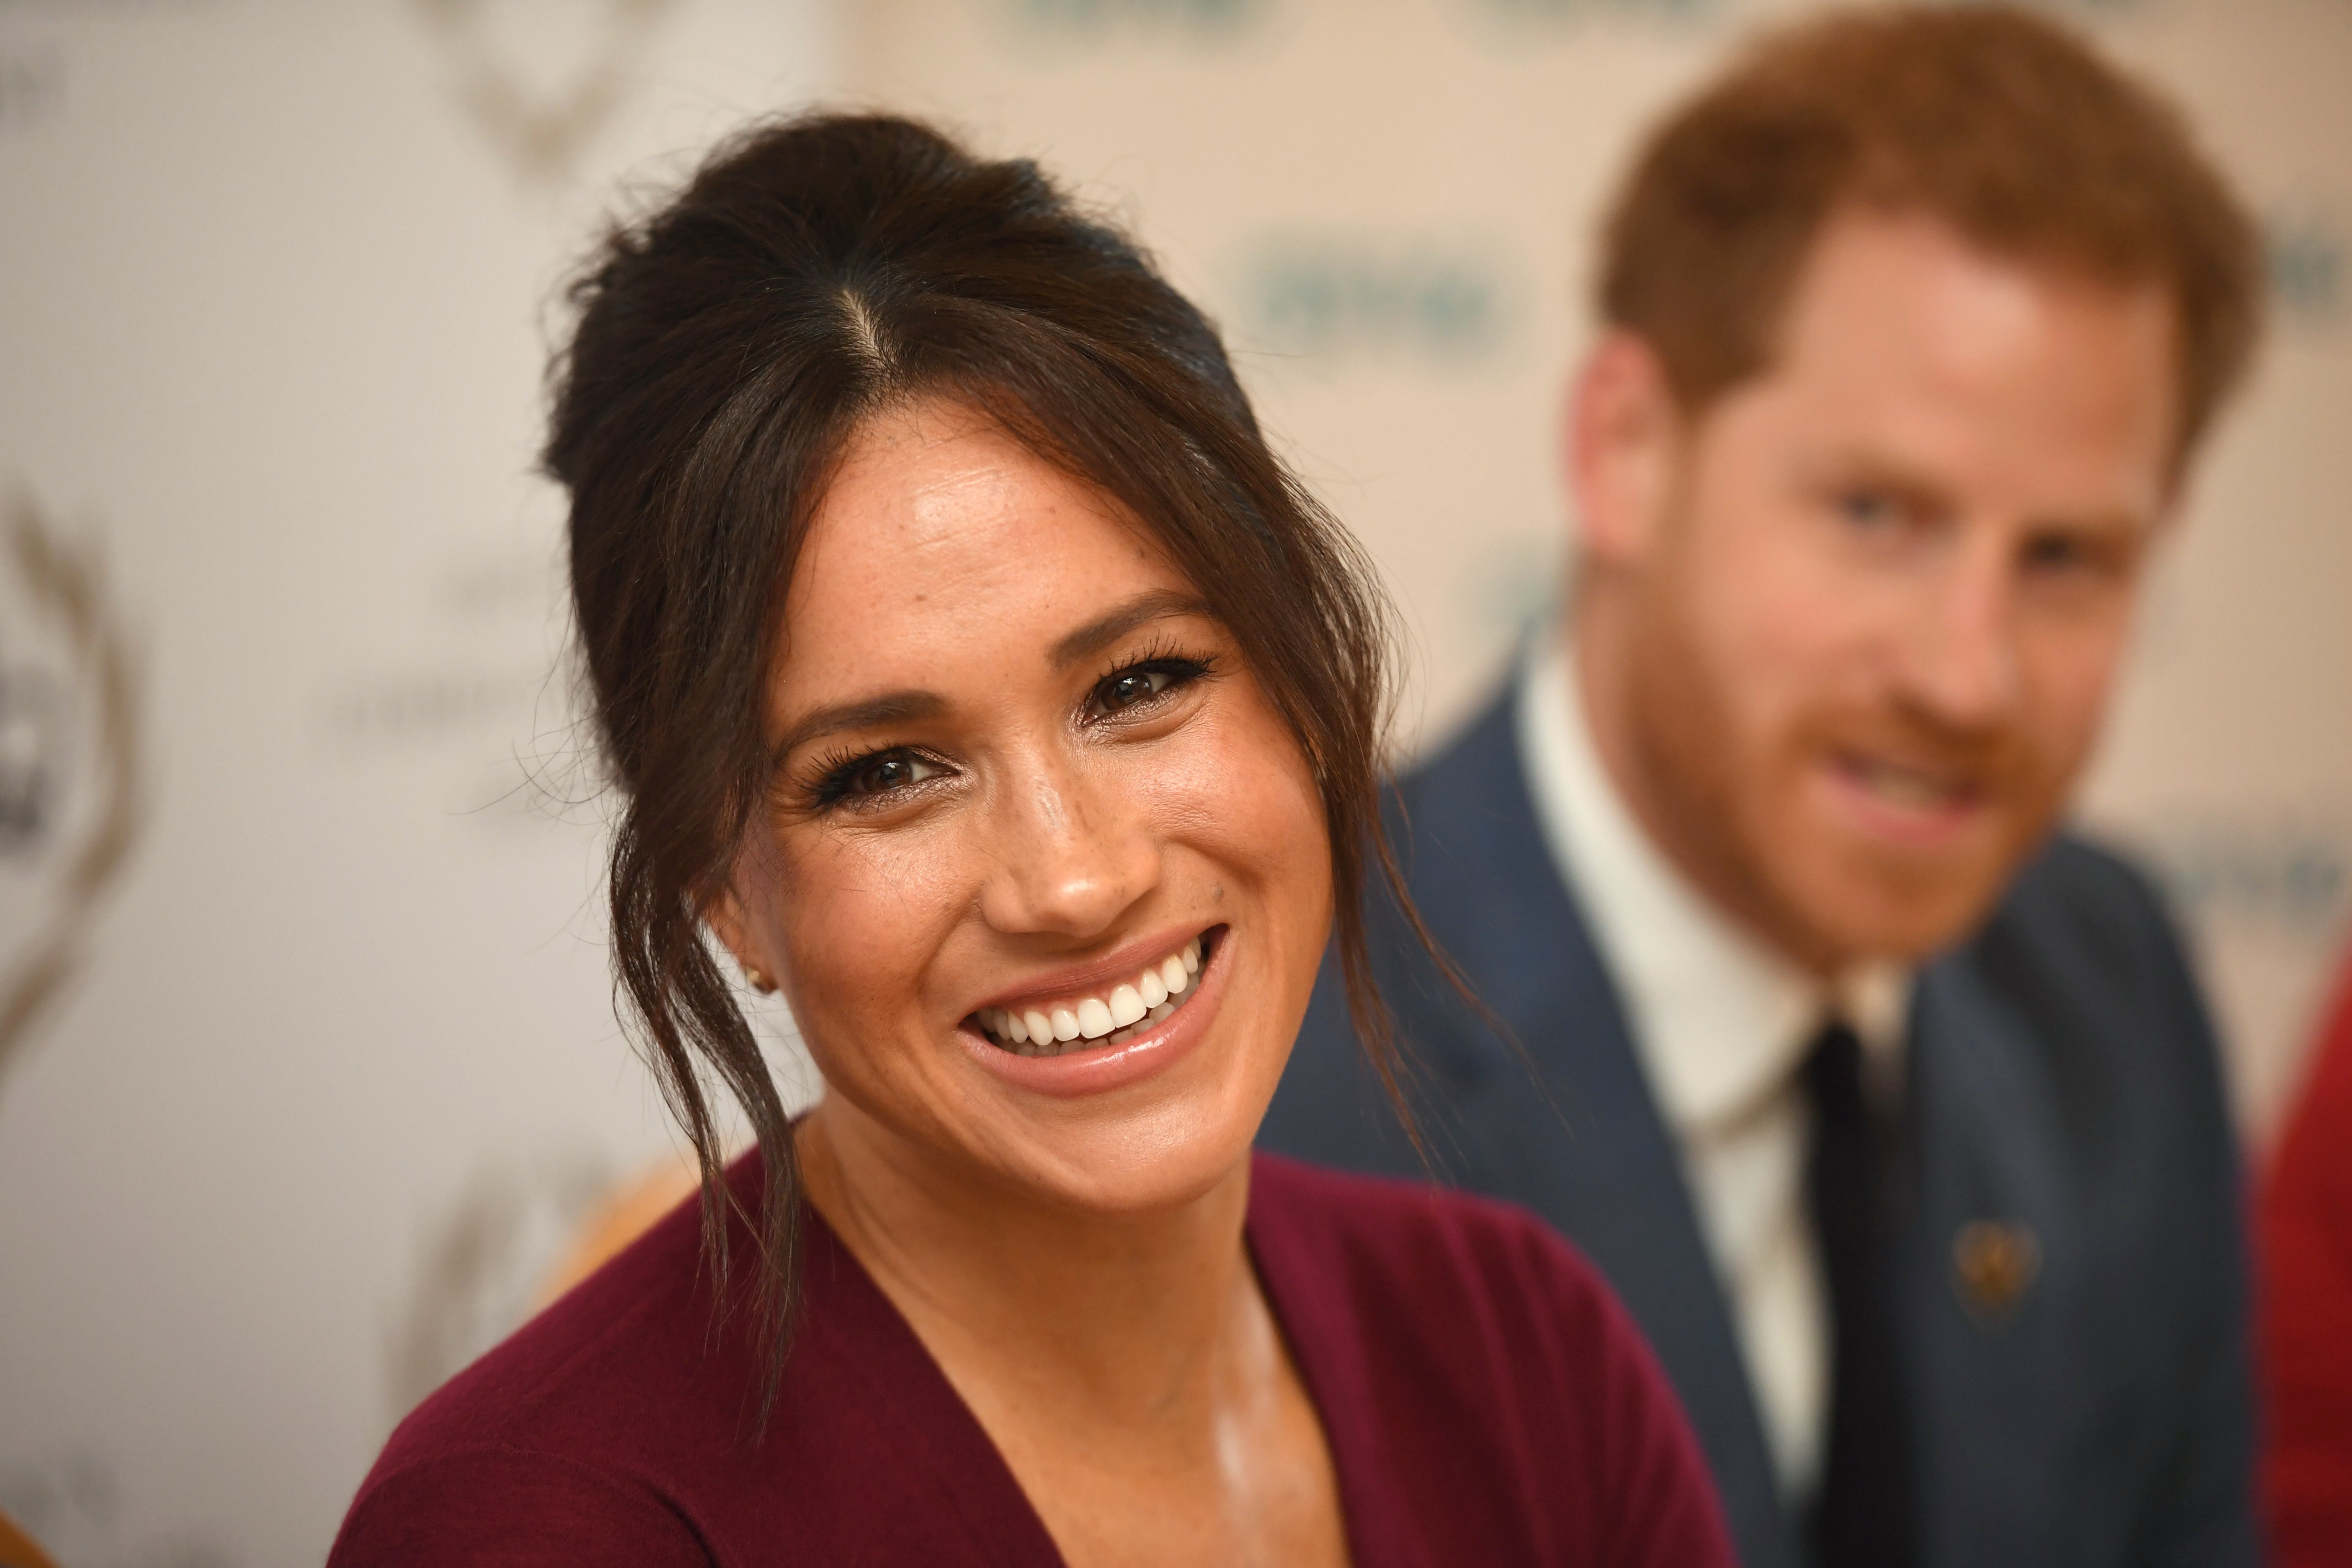 Meghan Markle and Prince Harry attend a roundtable discussion with The Queens Commonwealth Trust and One Young World on October 25, 2019 | Photo: GettyImages